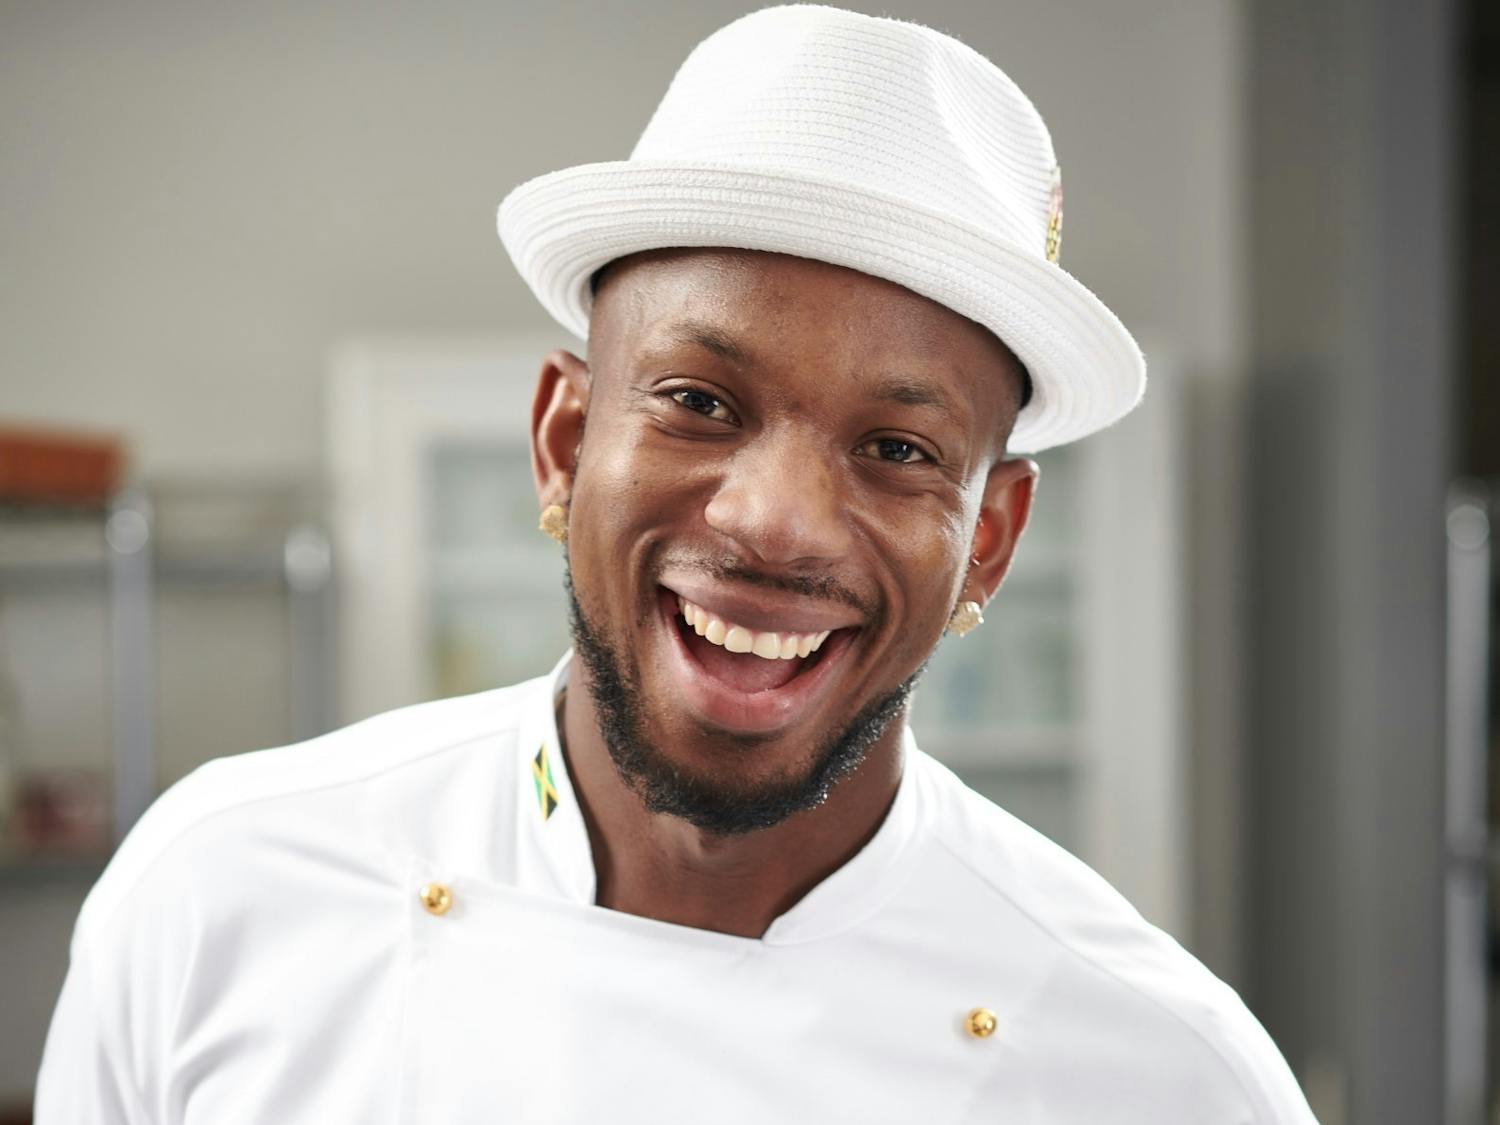 &nbsp;Darian Bryan is a personal chef for multiple Buffalo Bills players.&nbsp;